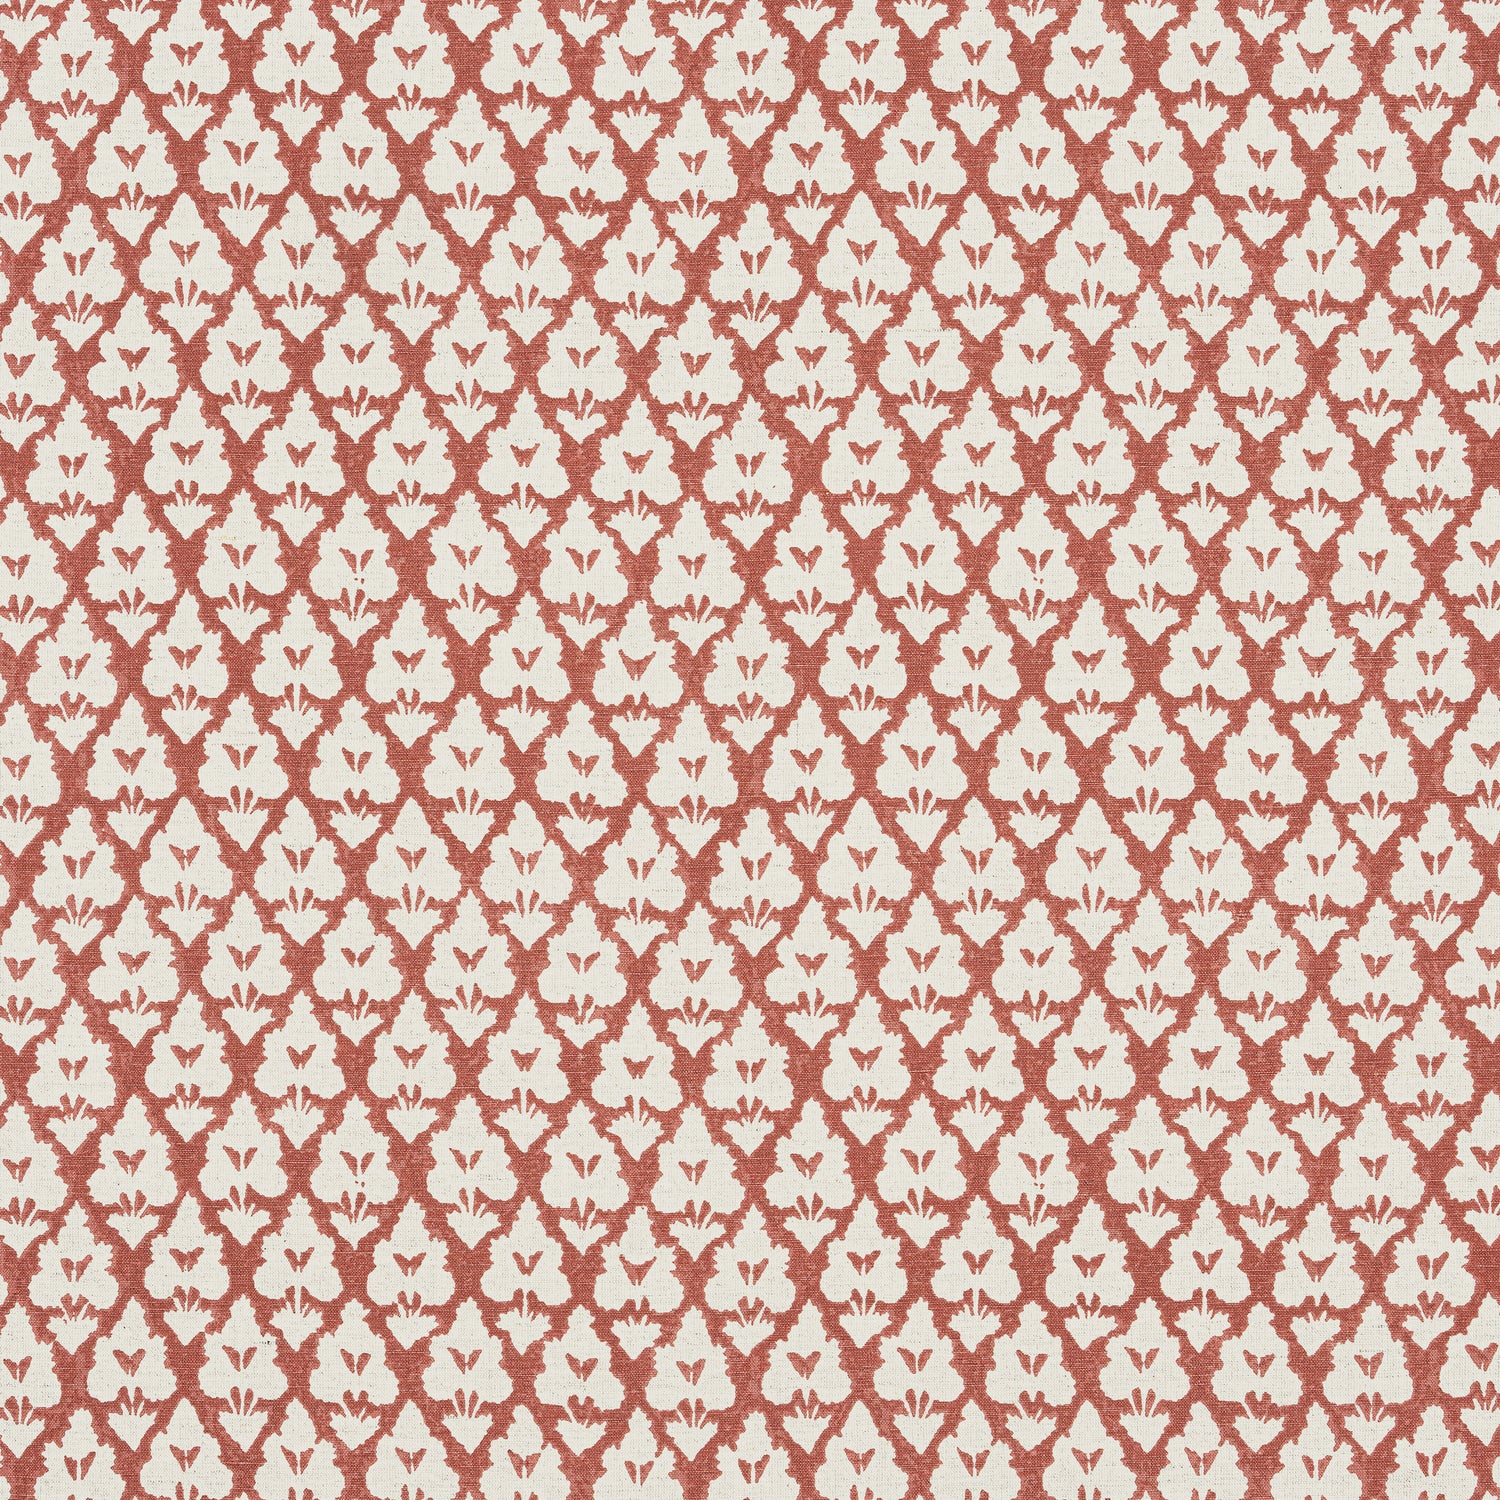 Arboreta fabric in cranberry color - pattern number F910834 - by Thibaut in the Heritage collection